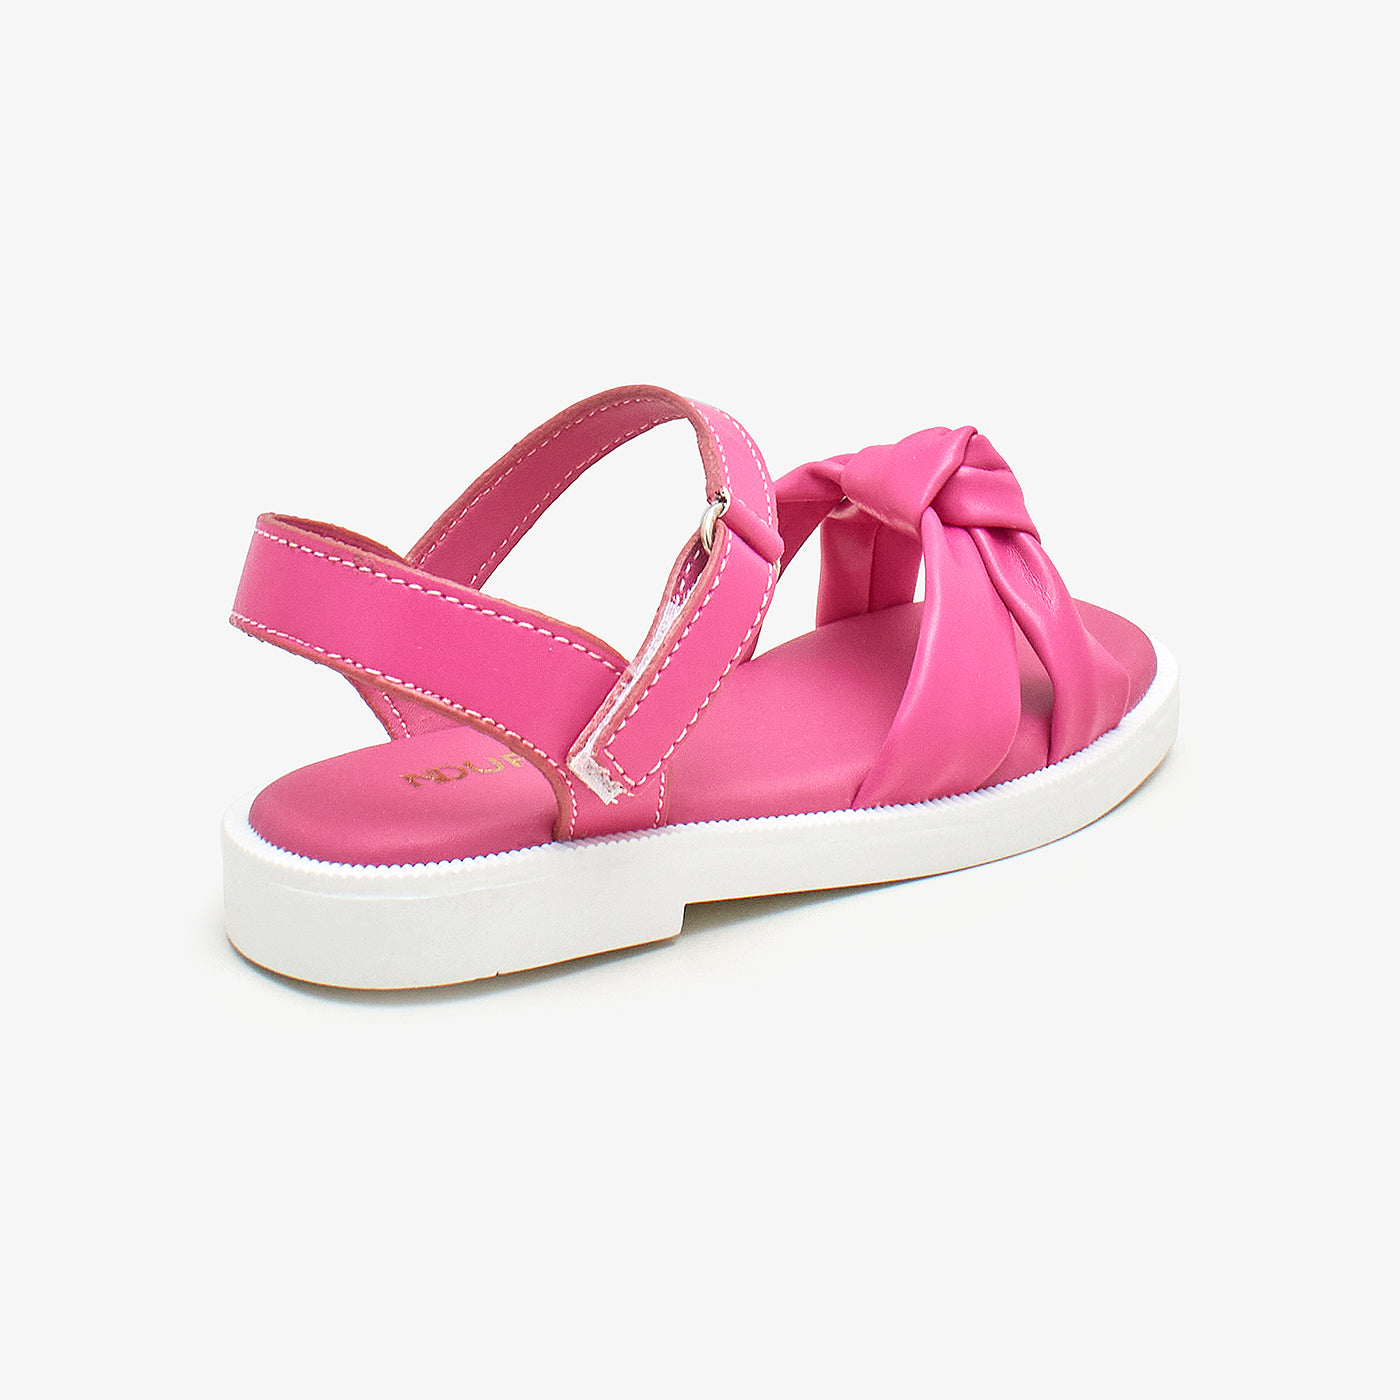 Girls' Colorful Sandals